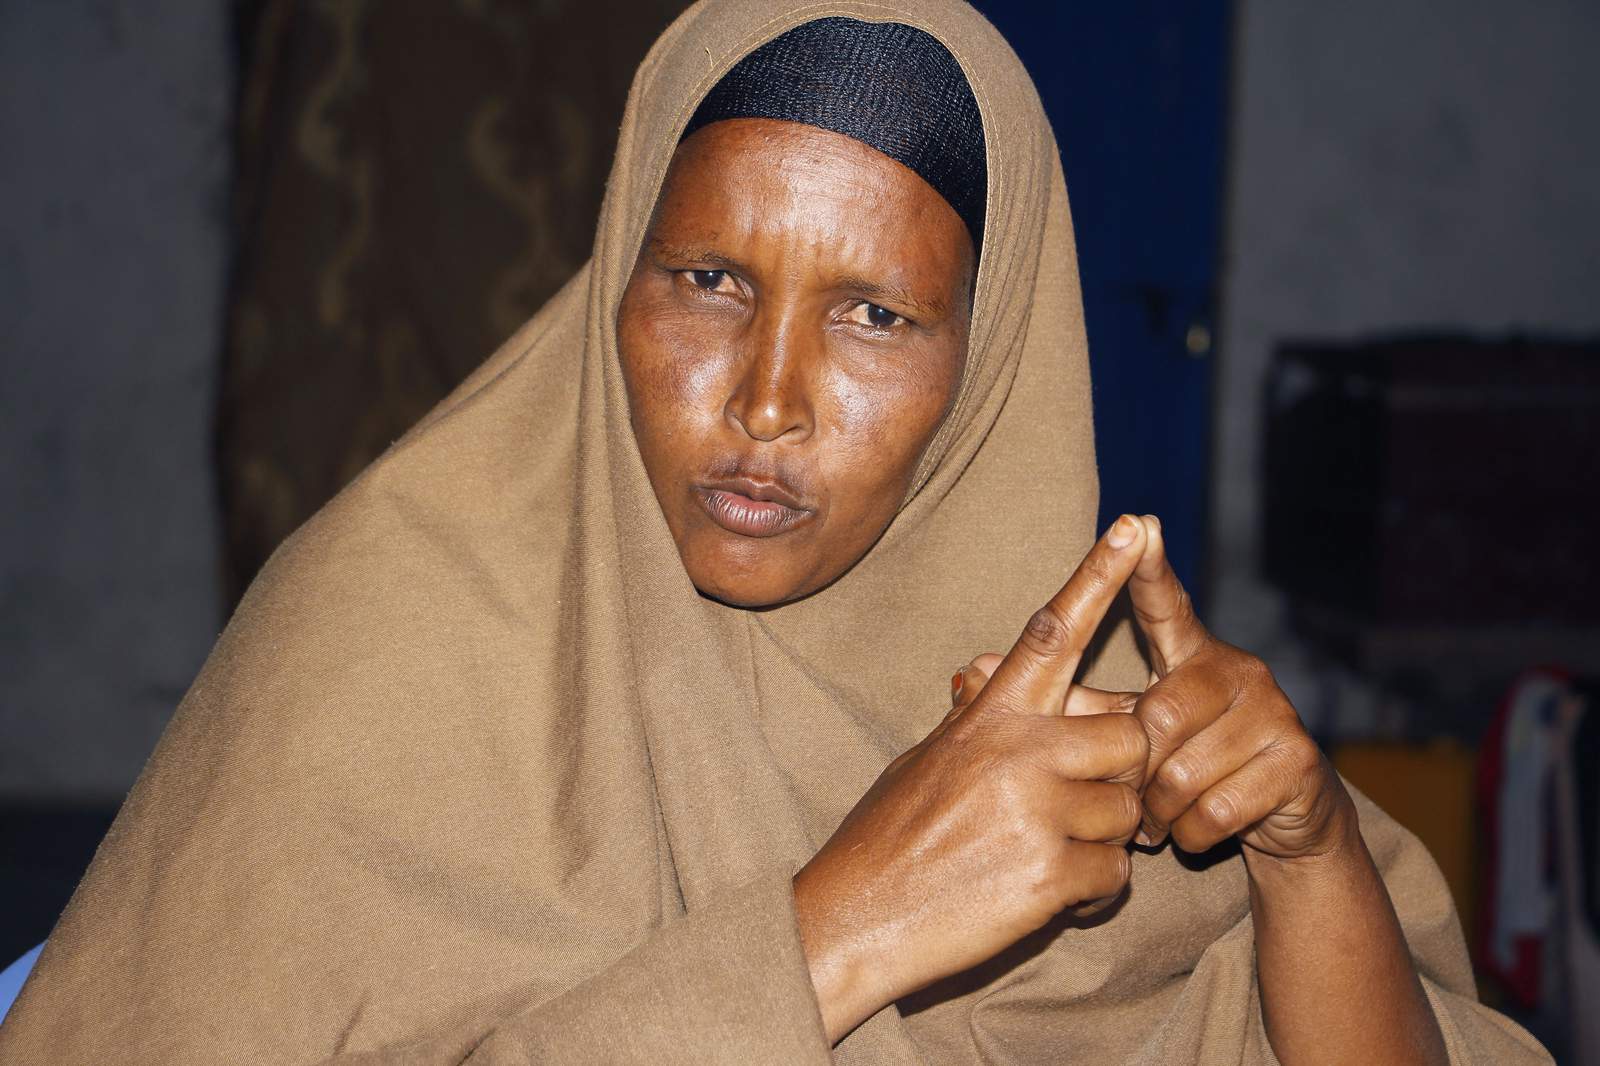 In Somalia, mothers fear sons were sent to Ethiopia conflict